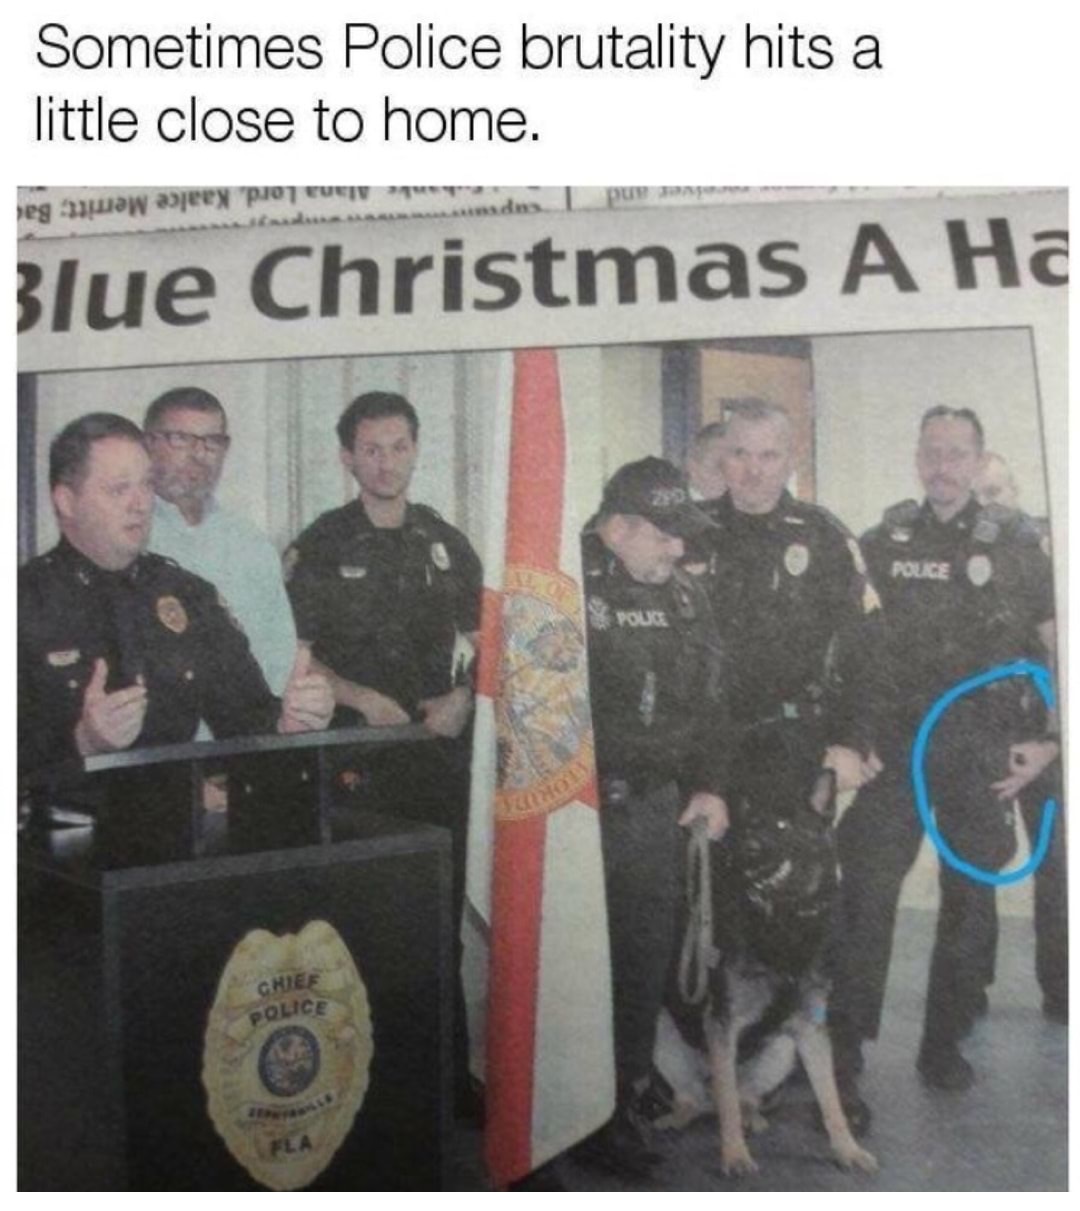 acab meme - Sometimes Police brutality hits a little close to home. regw ajeex po Blue Christmas A Ha Chief Olice